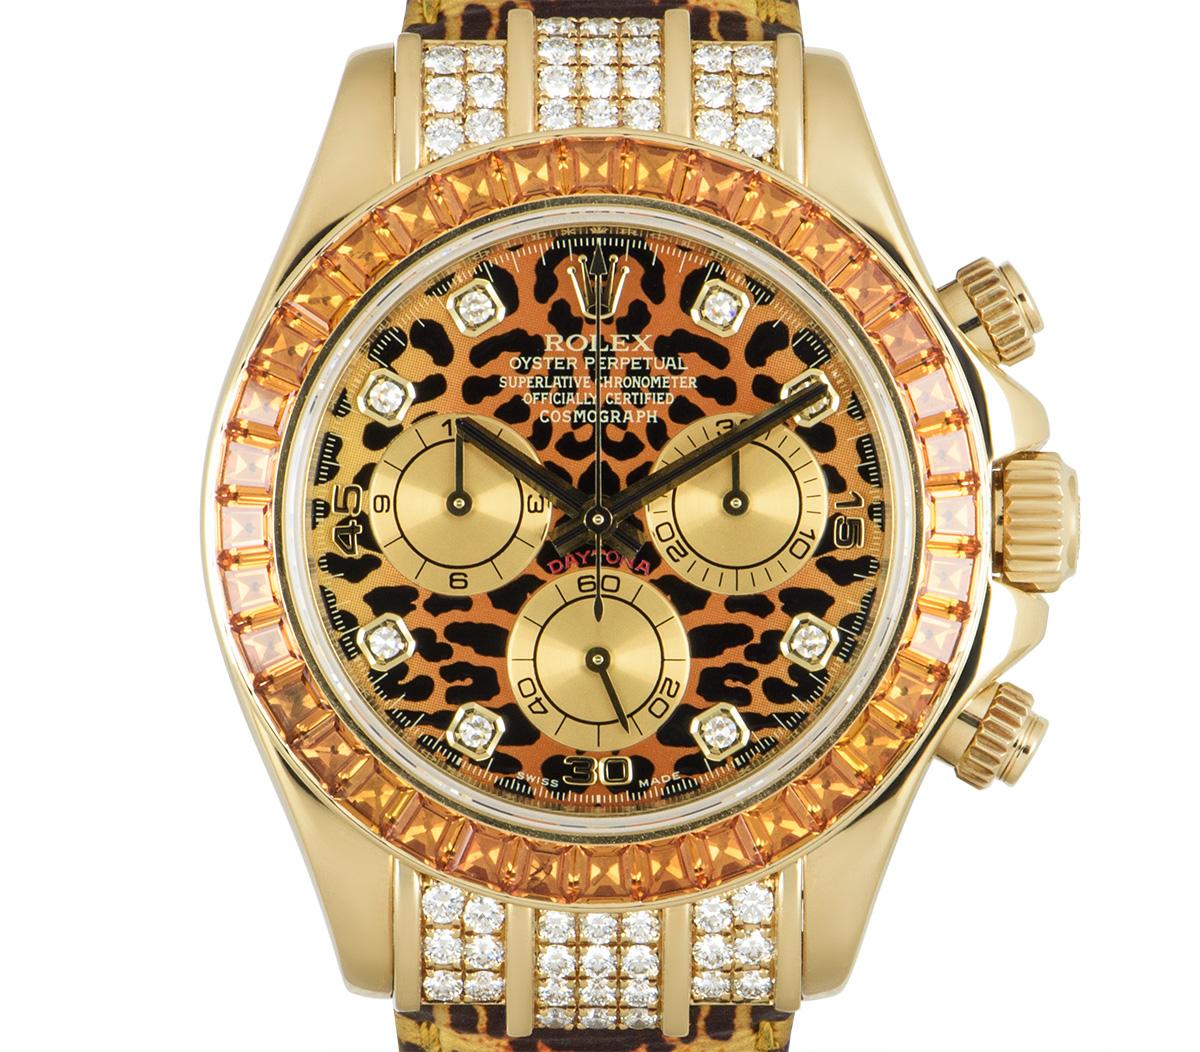 This 40 mm Daytona in yellow gold by Rolex, nicknamed leopard was introduced in Basel in 2004. Featuring a leopard print dial set with 8 round brilliant cut diamond hour markers and the bezel set with 36 baguette cut cognac sapphires. The lugs are